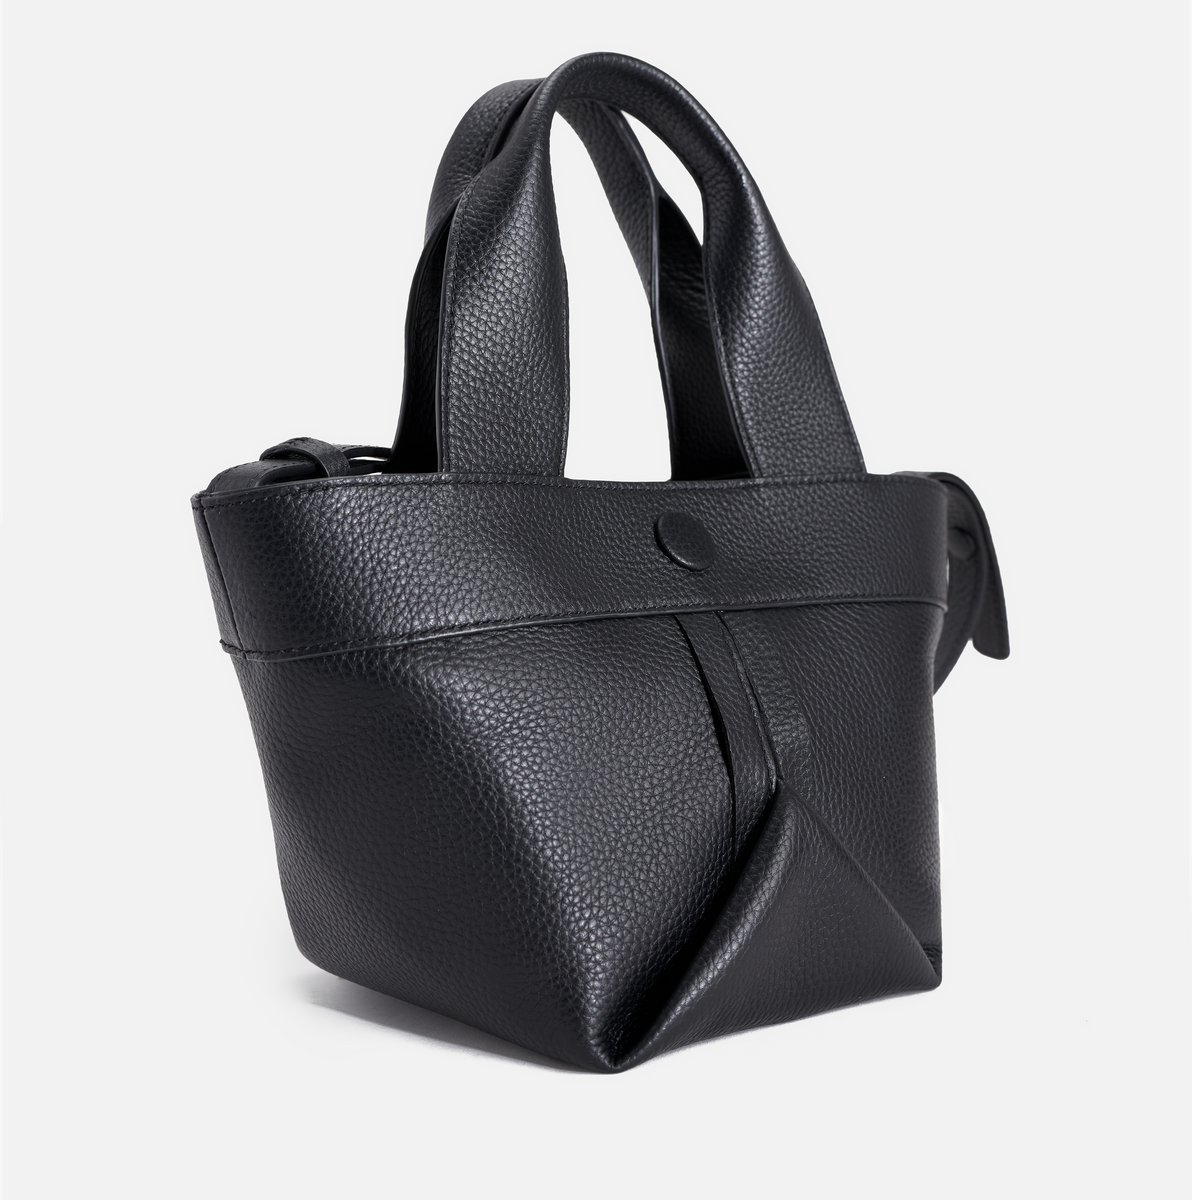 Gusset small pebble leather tote in black with white edge paint